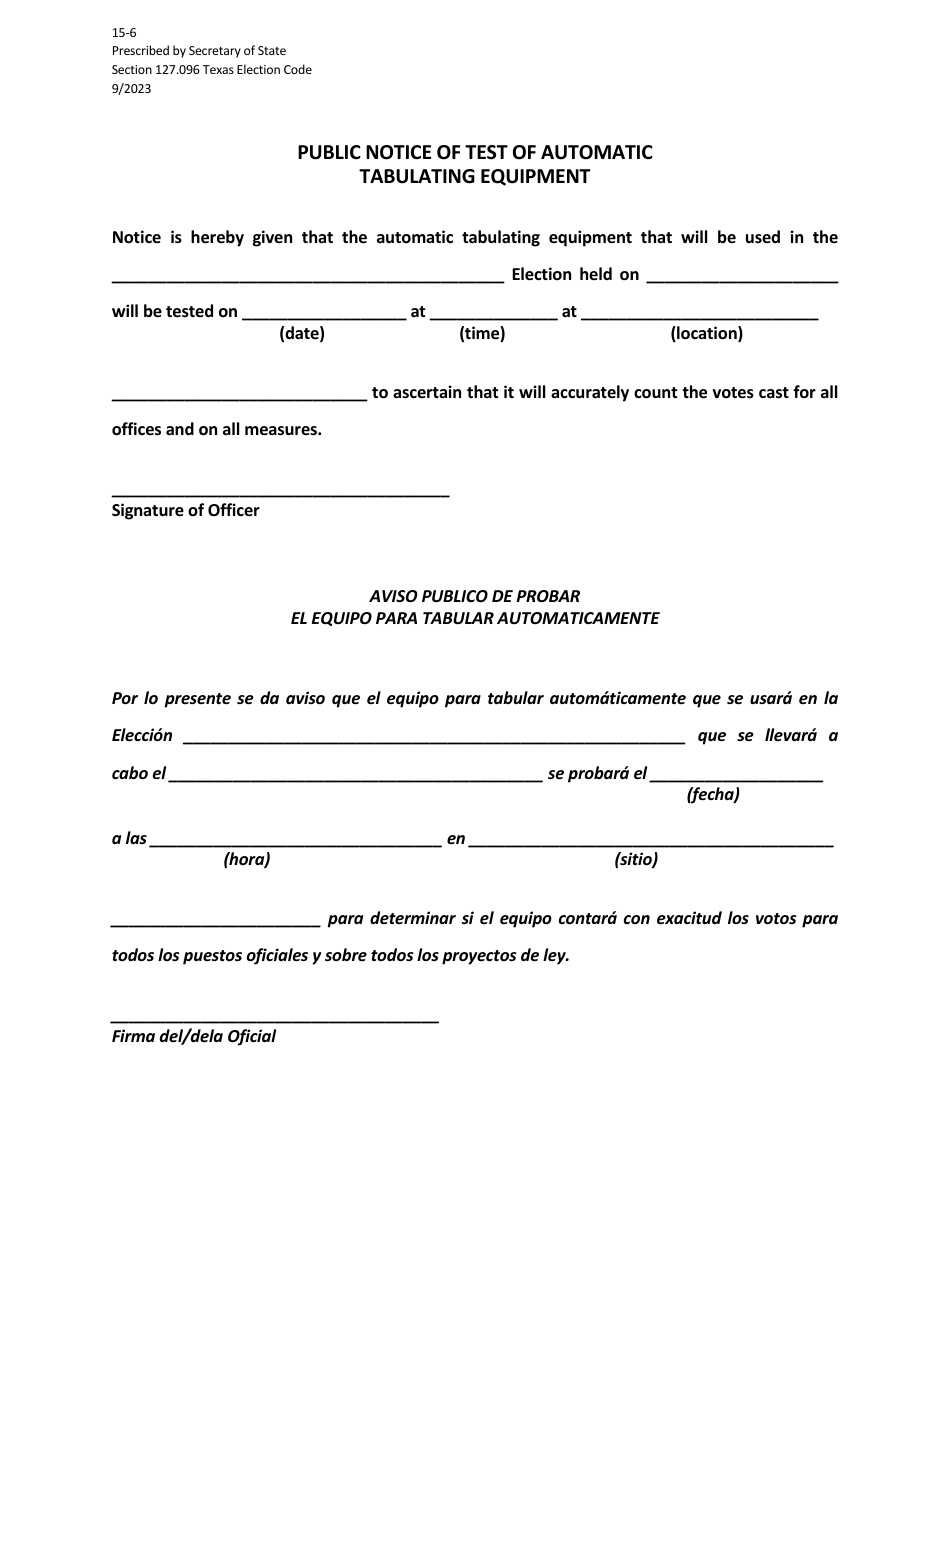 Form 15-6 Public Notice of Test of Automatic Tabulating Equipment - Texas (English / Spanish), Page 1